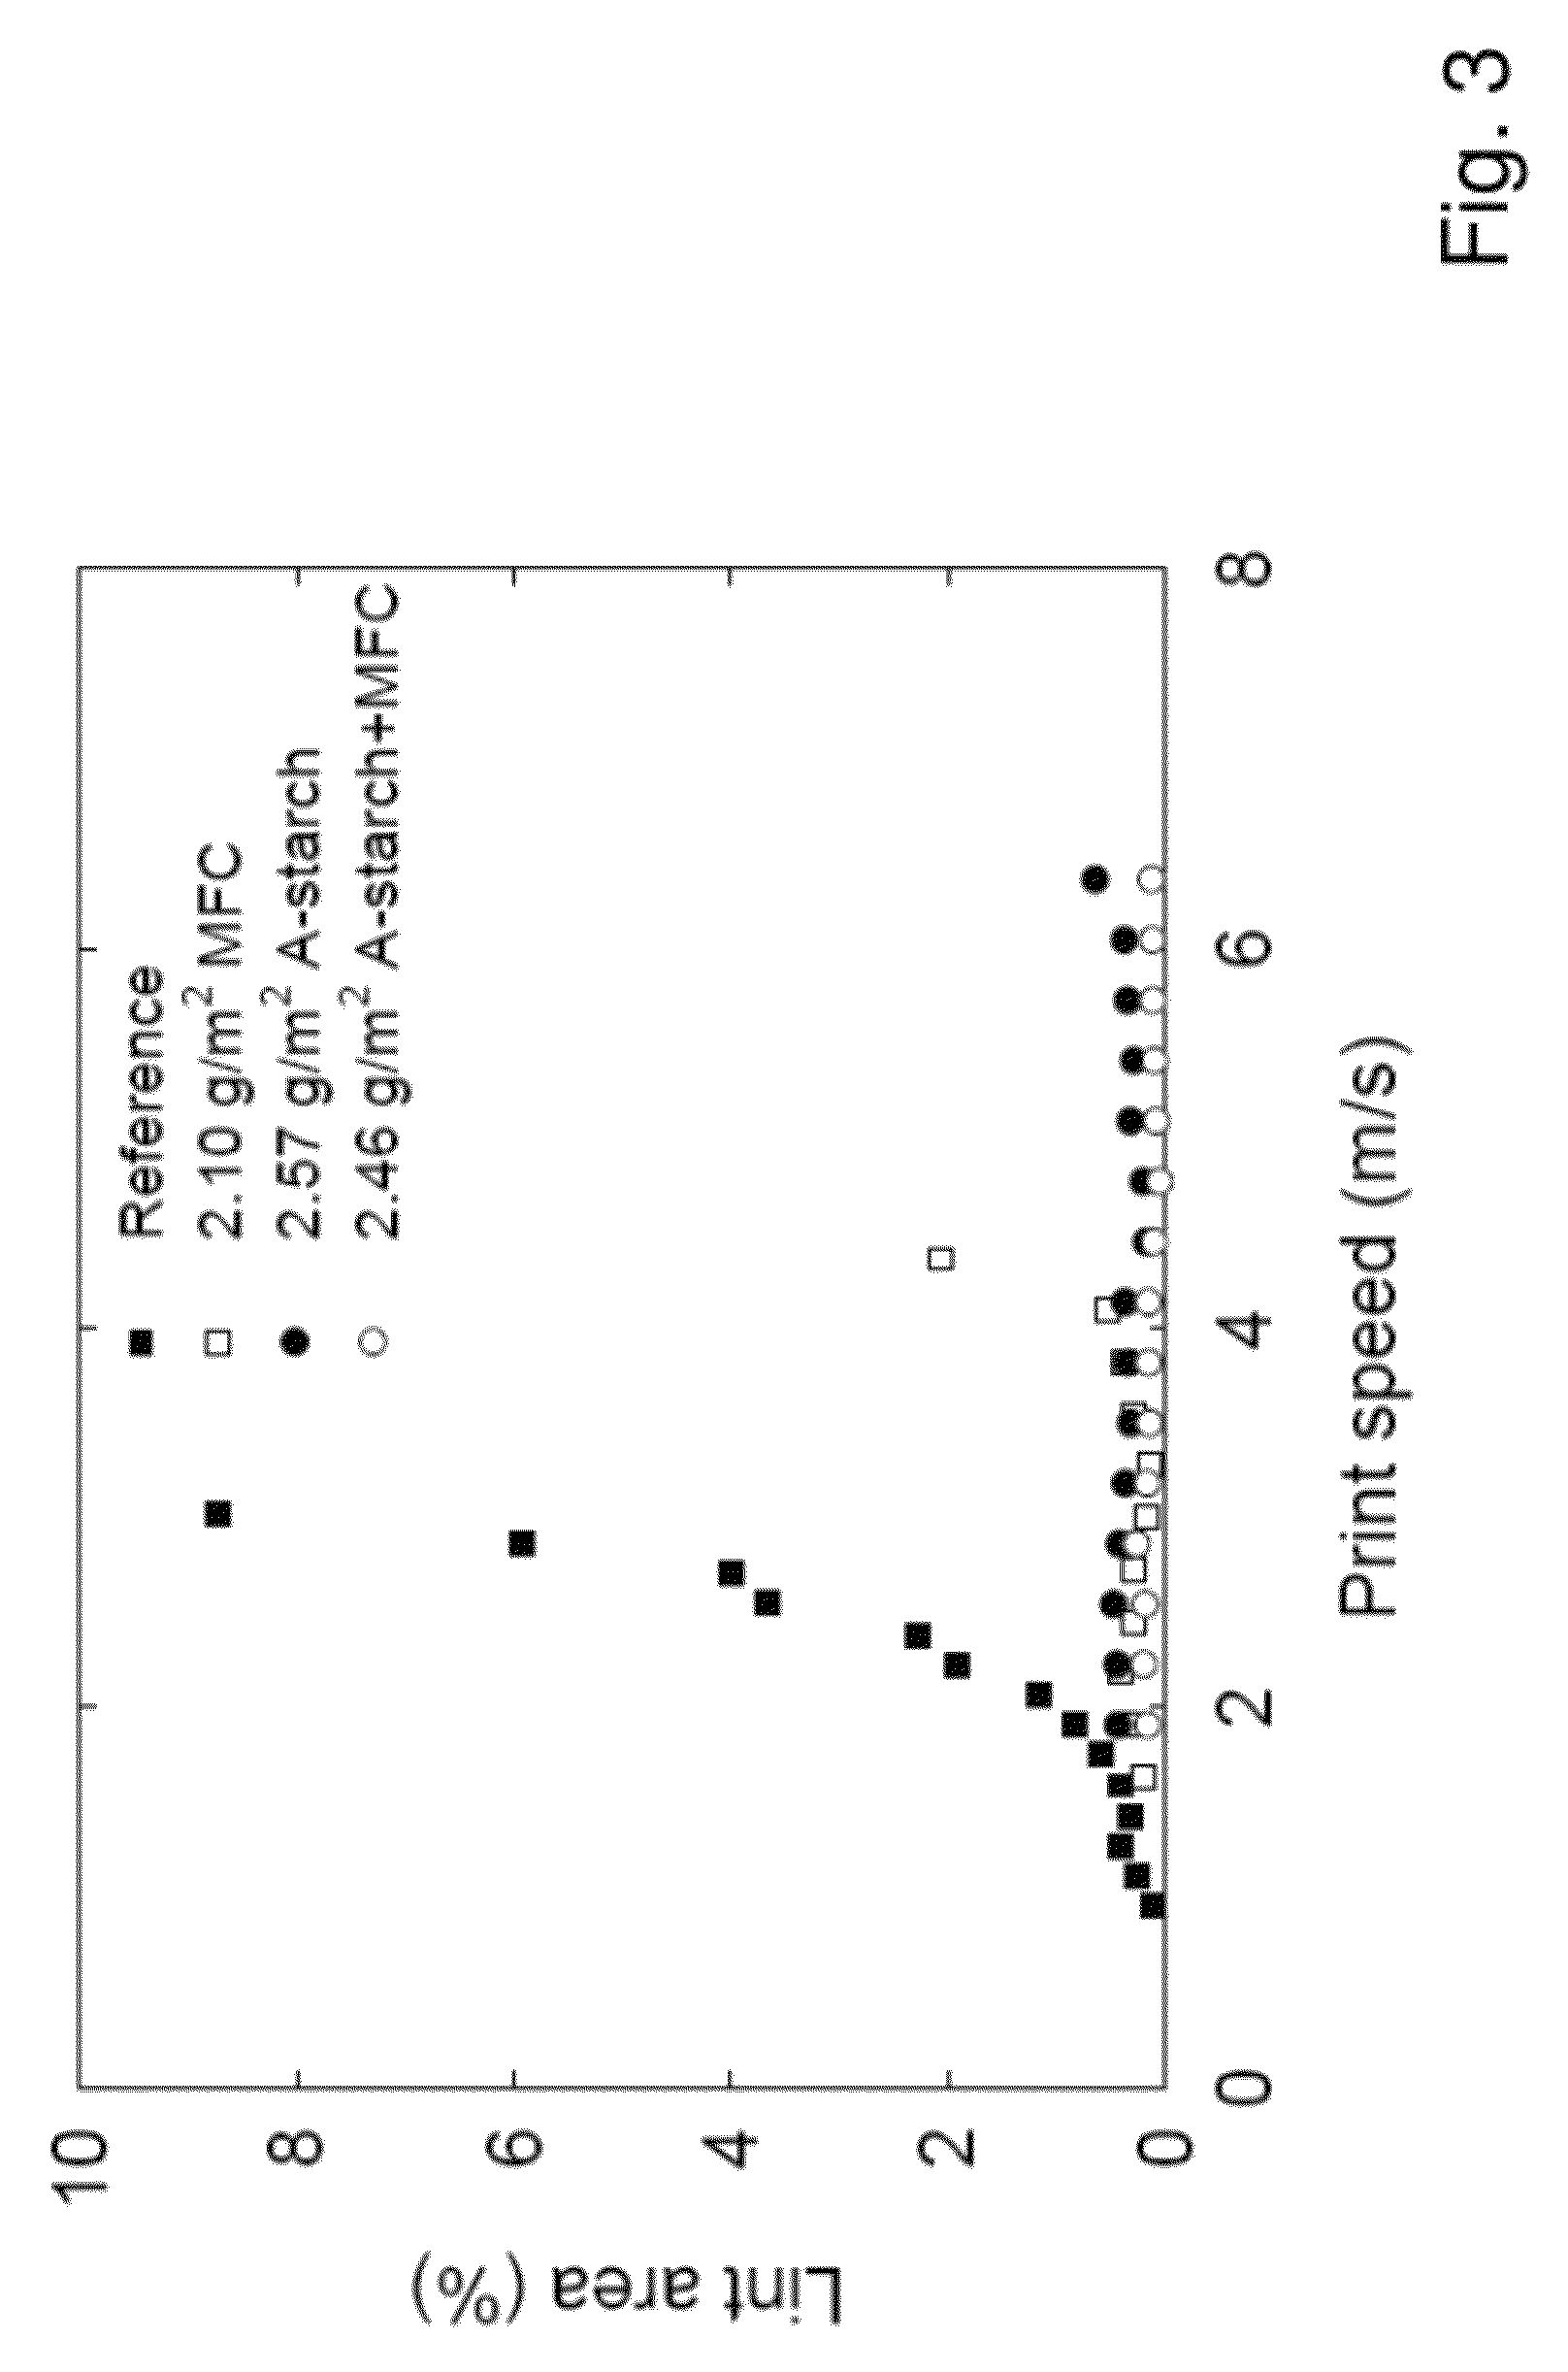 Composition for coating of printing paper